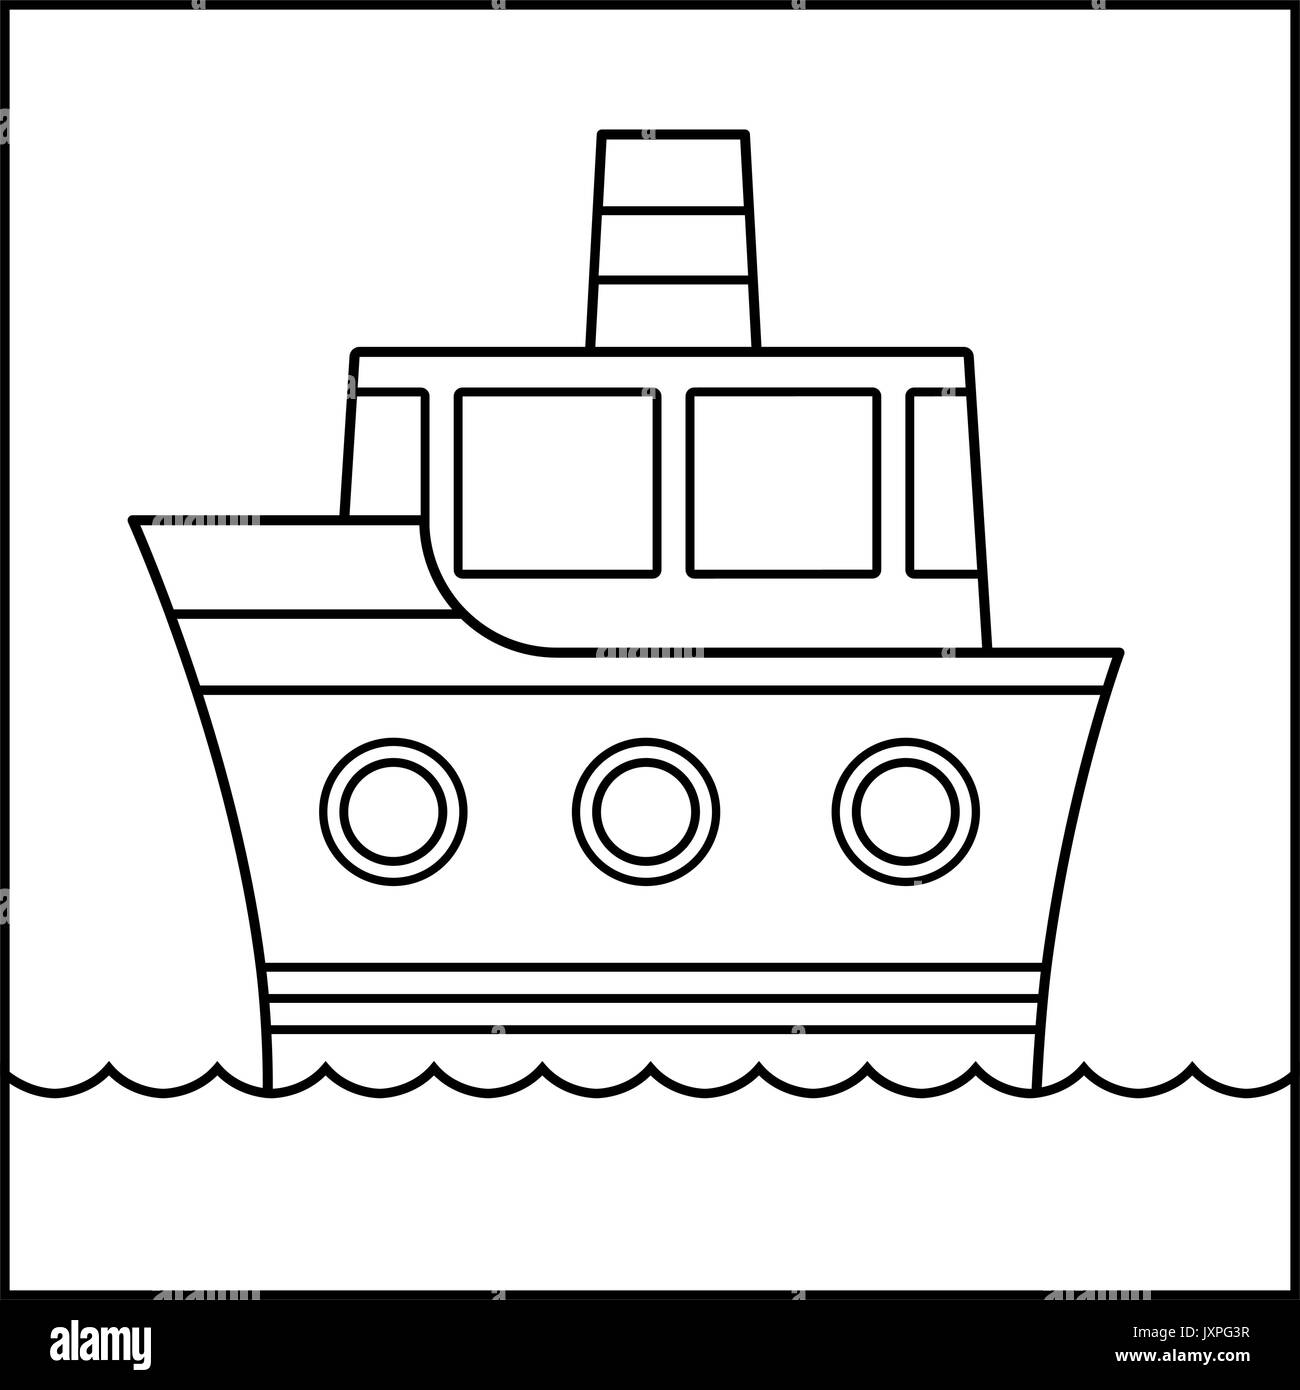 Outline cartoon ship design cruising on water suitable for coloring in for kids, black and white vector illustration Stock Vector